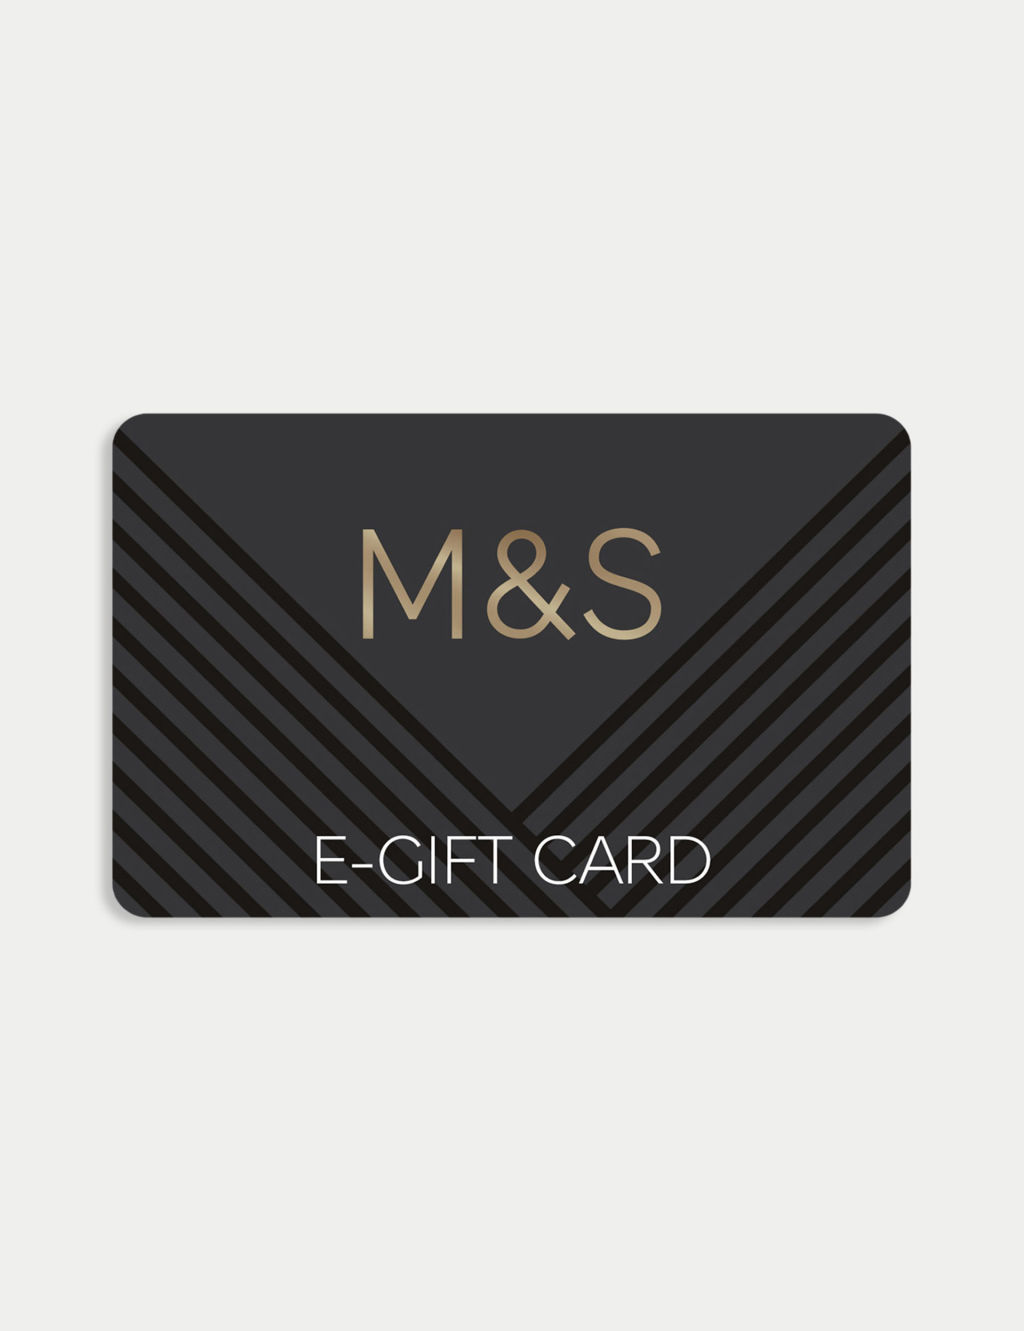 M&S Gift Card E-Gift Card 1 of 1